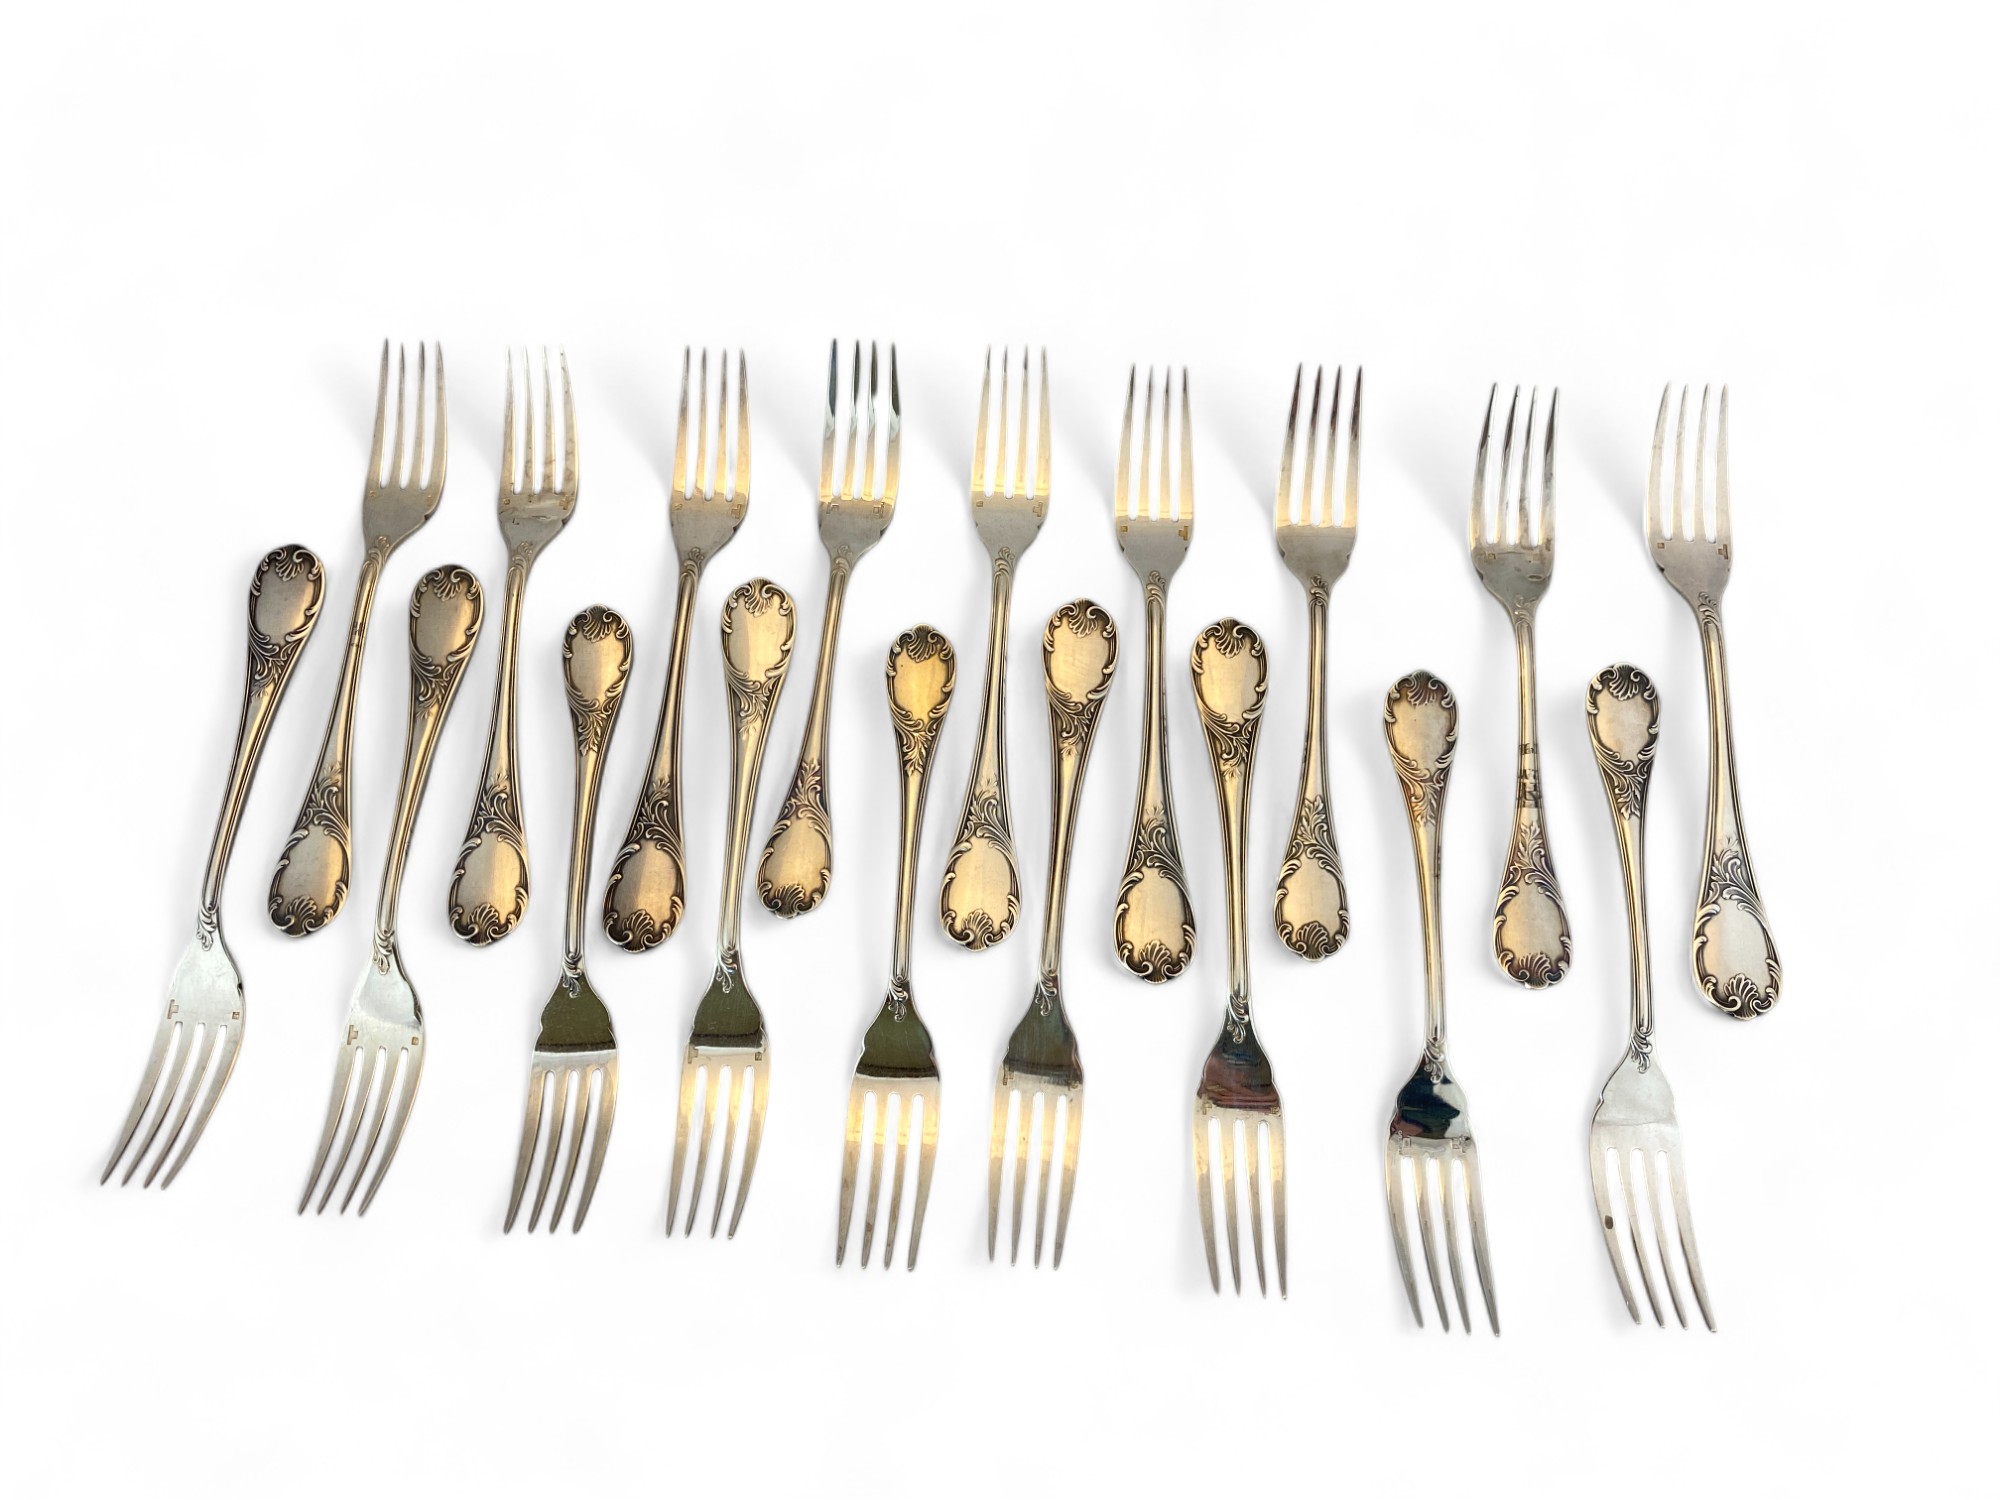 An extensive composite canteen of mostly silver plated Marly pattern cutlery by Christofle, Paris - Image 23 of 99